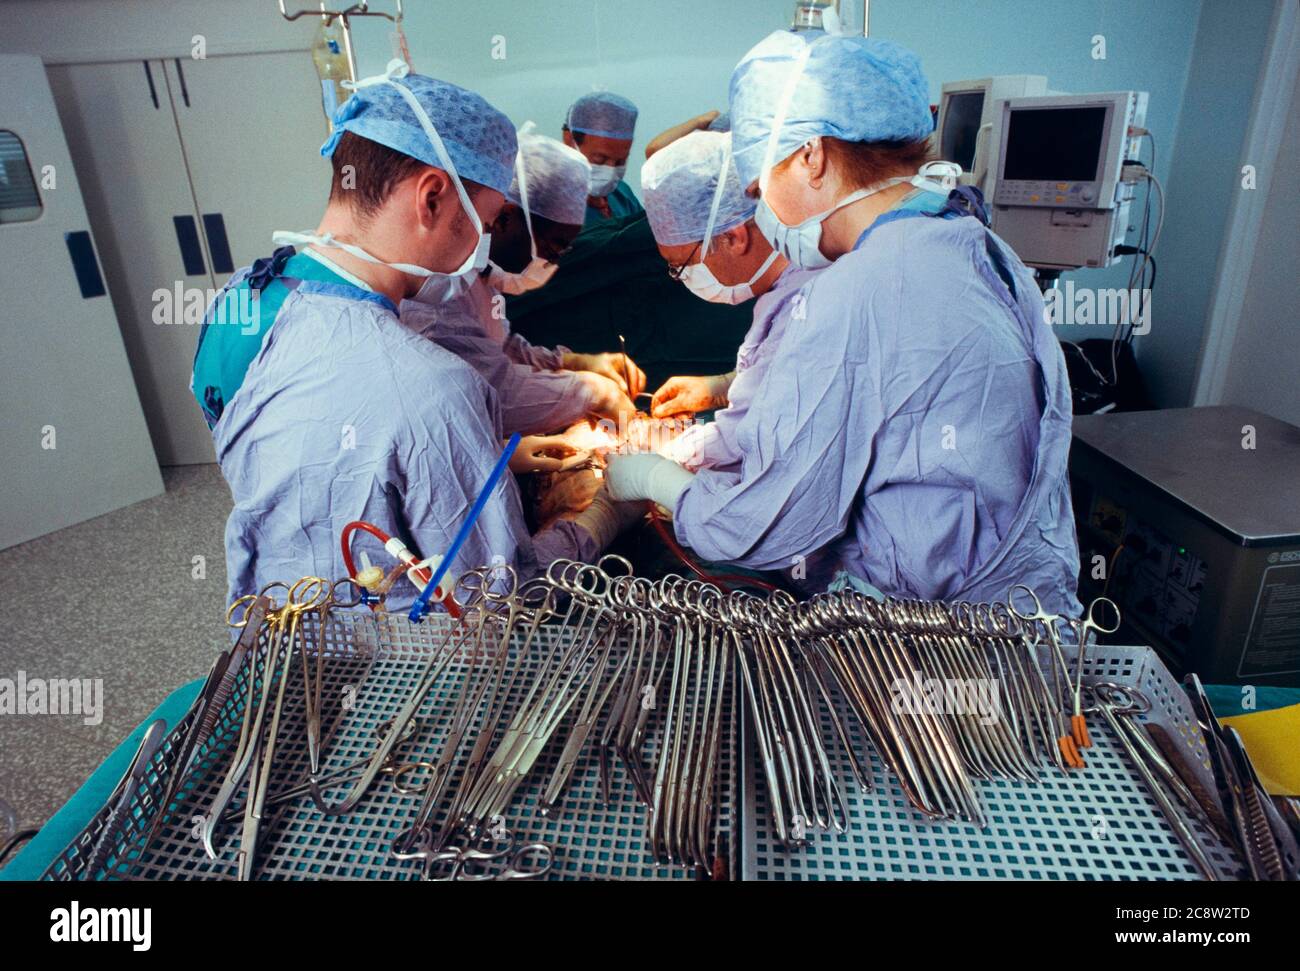 Tray of surgical instruments in the sterile area of an operating theatre Stock Photo